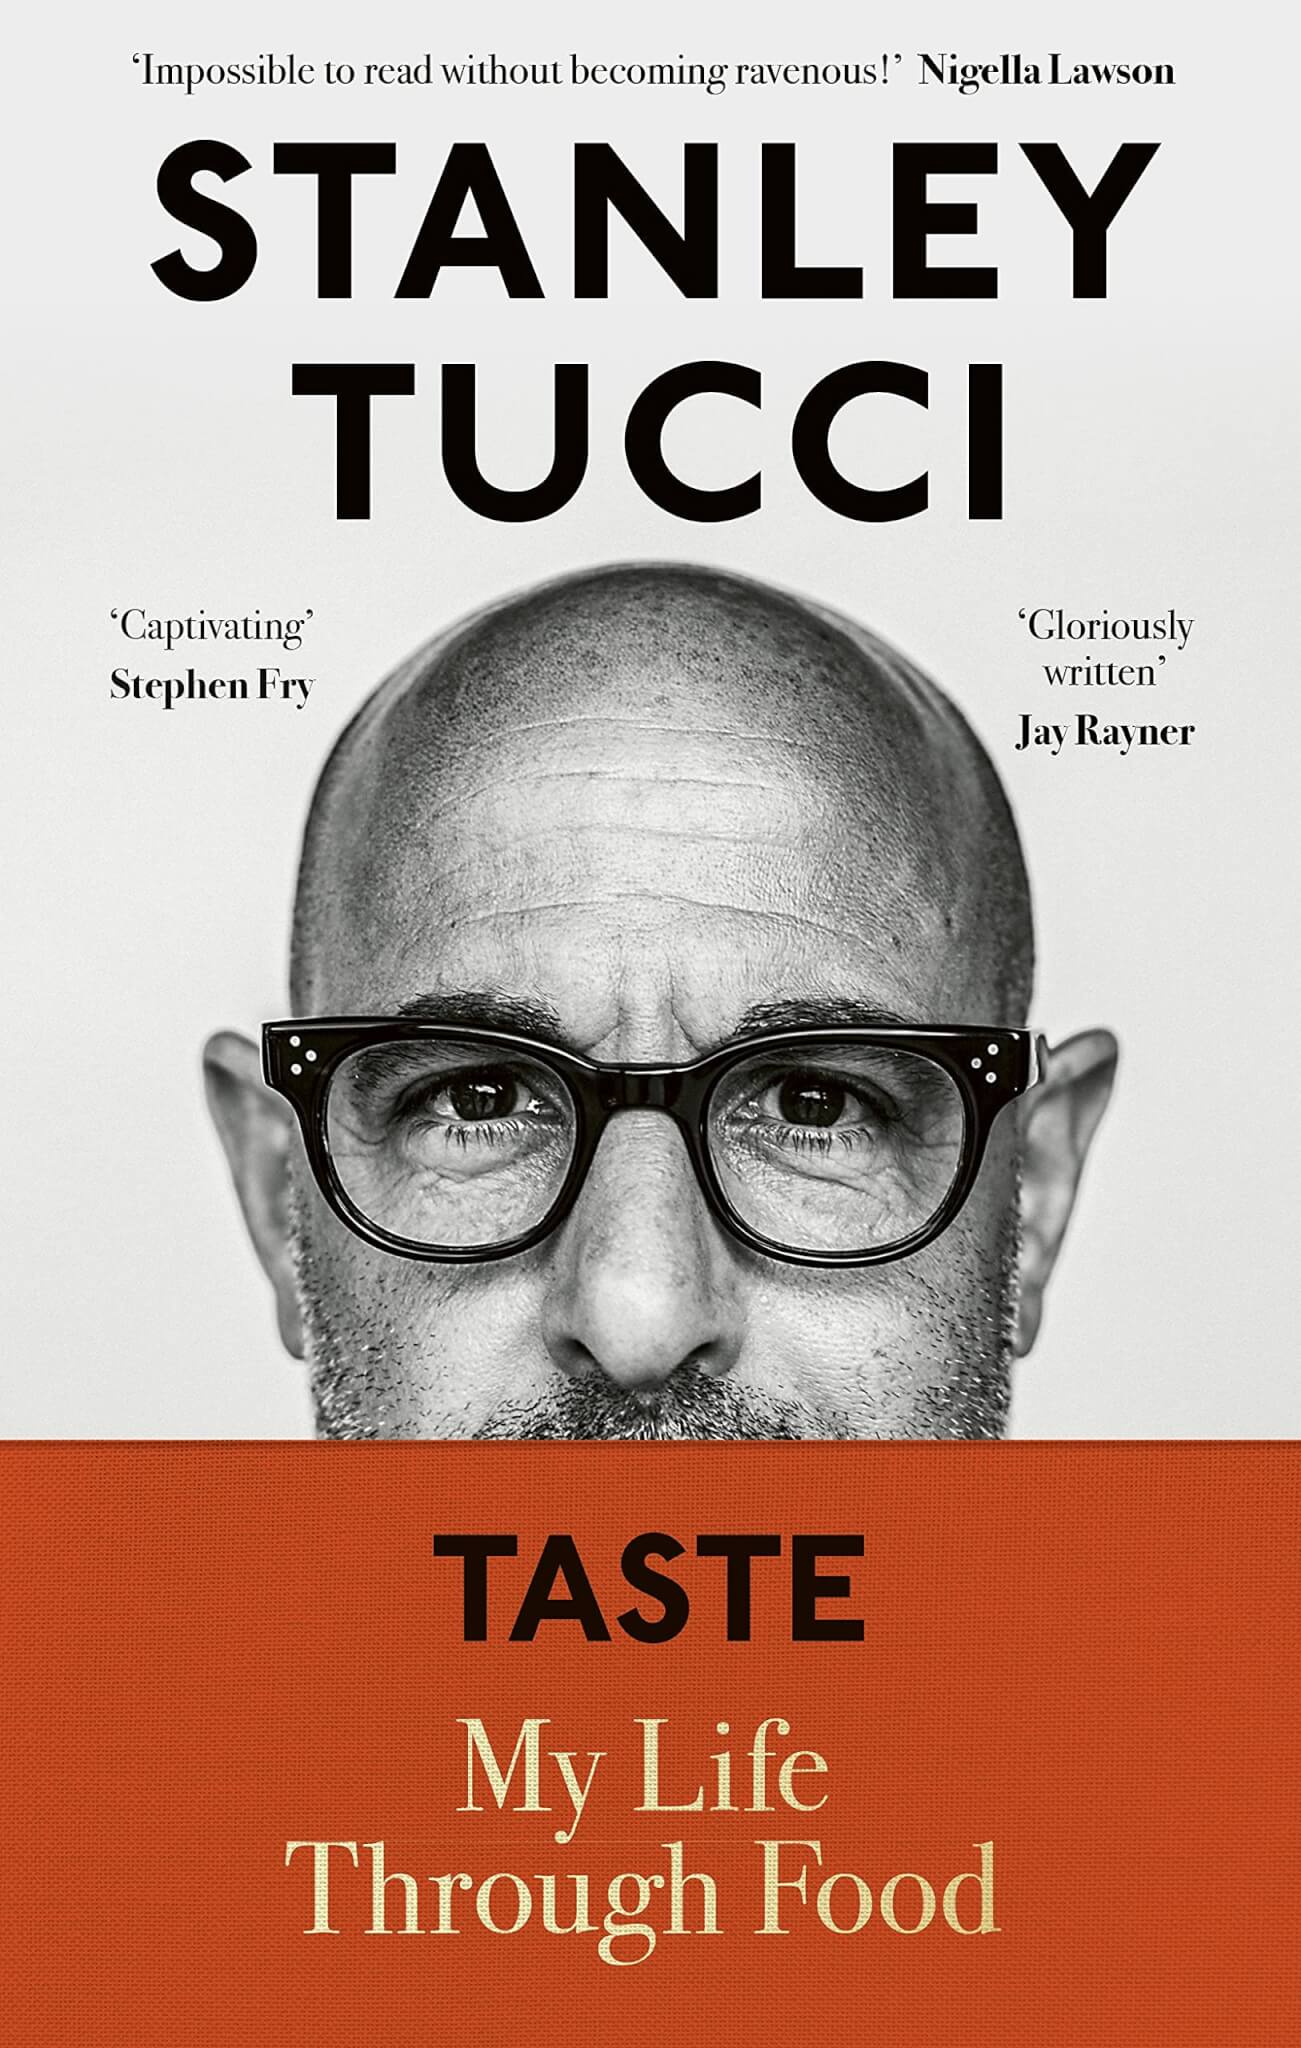 Image credit of Author and Publisher. Stanley Tucci Taste My Life Through Food Book Cover. Image used for review.